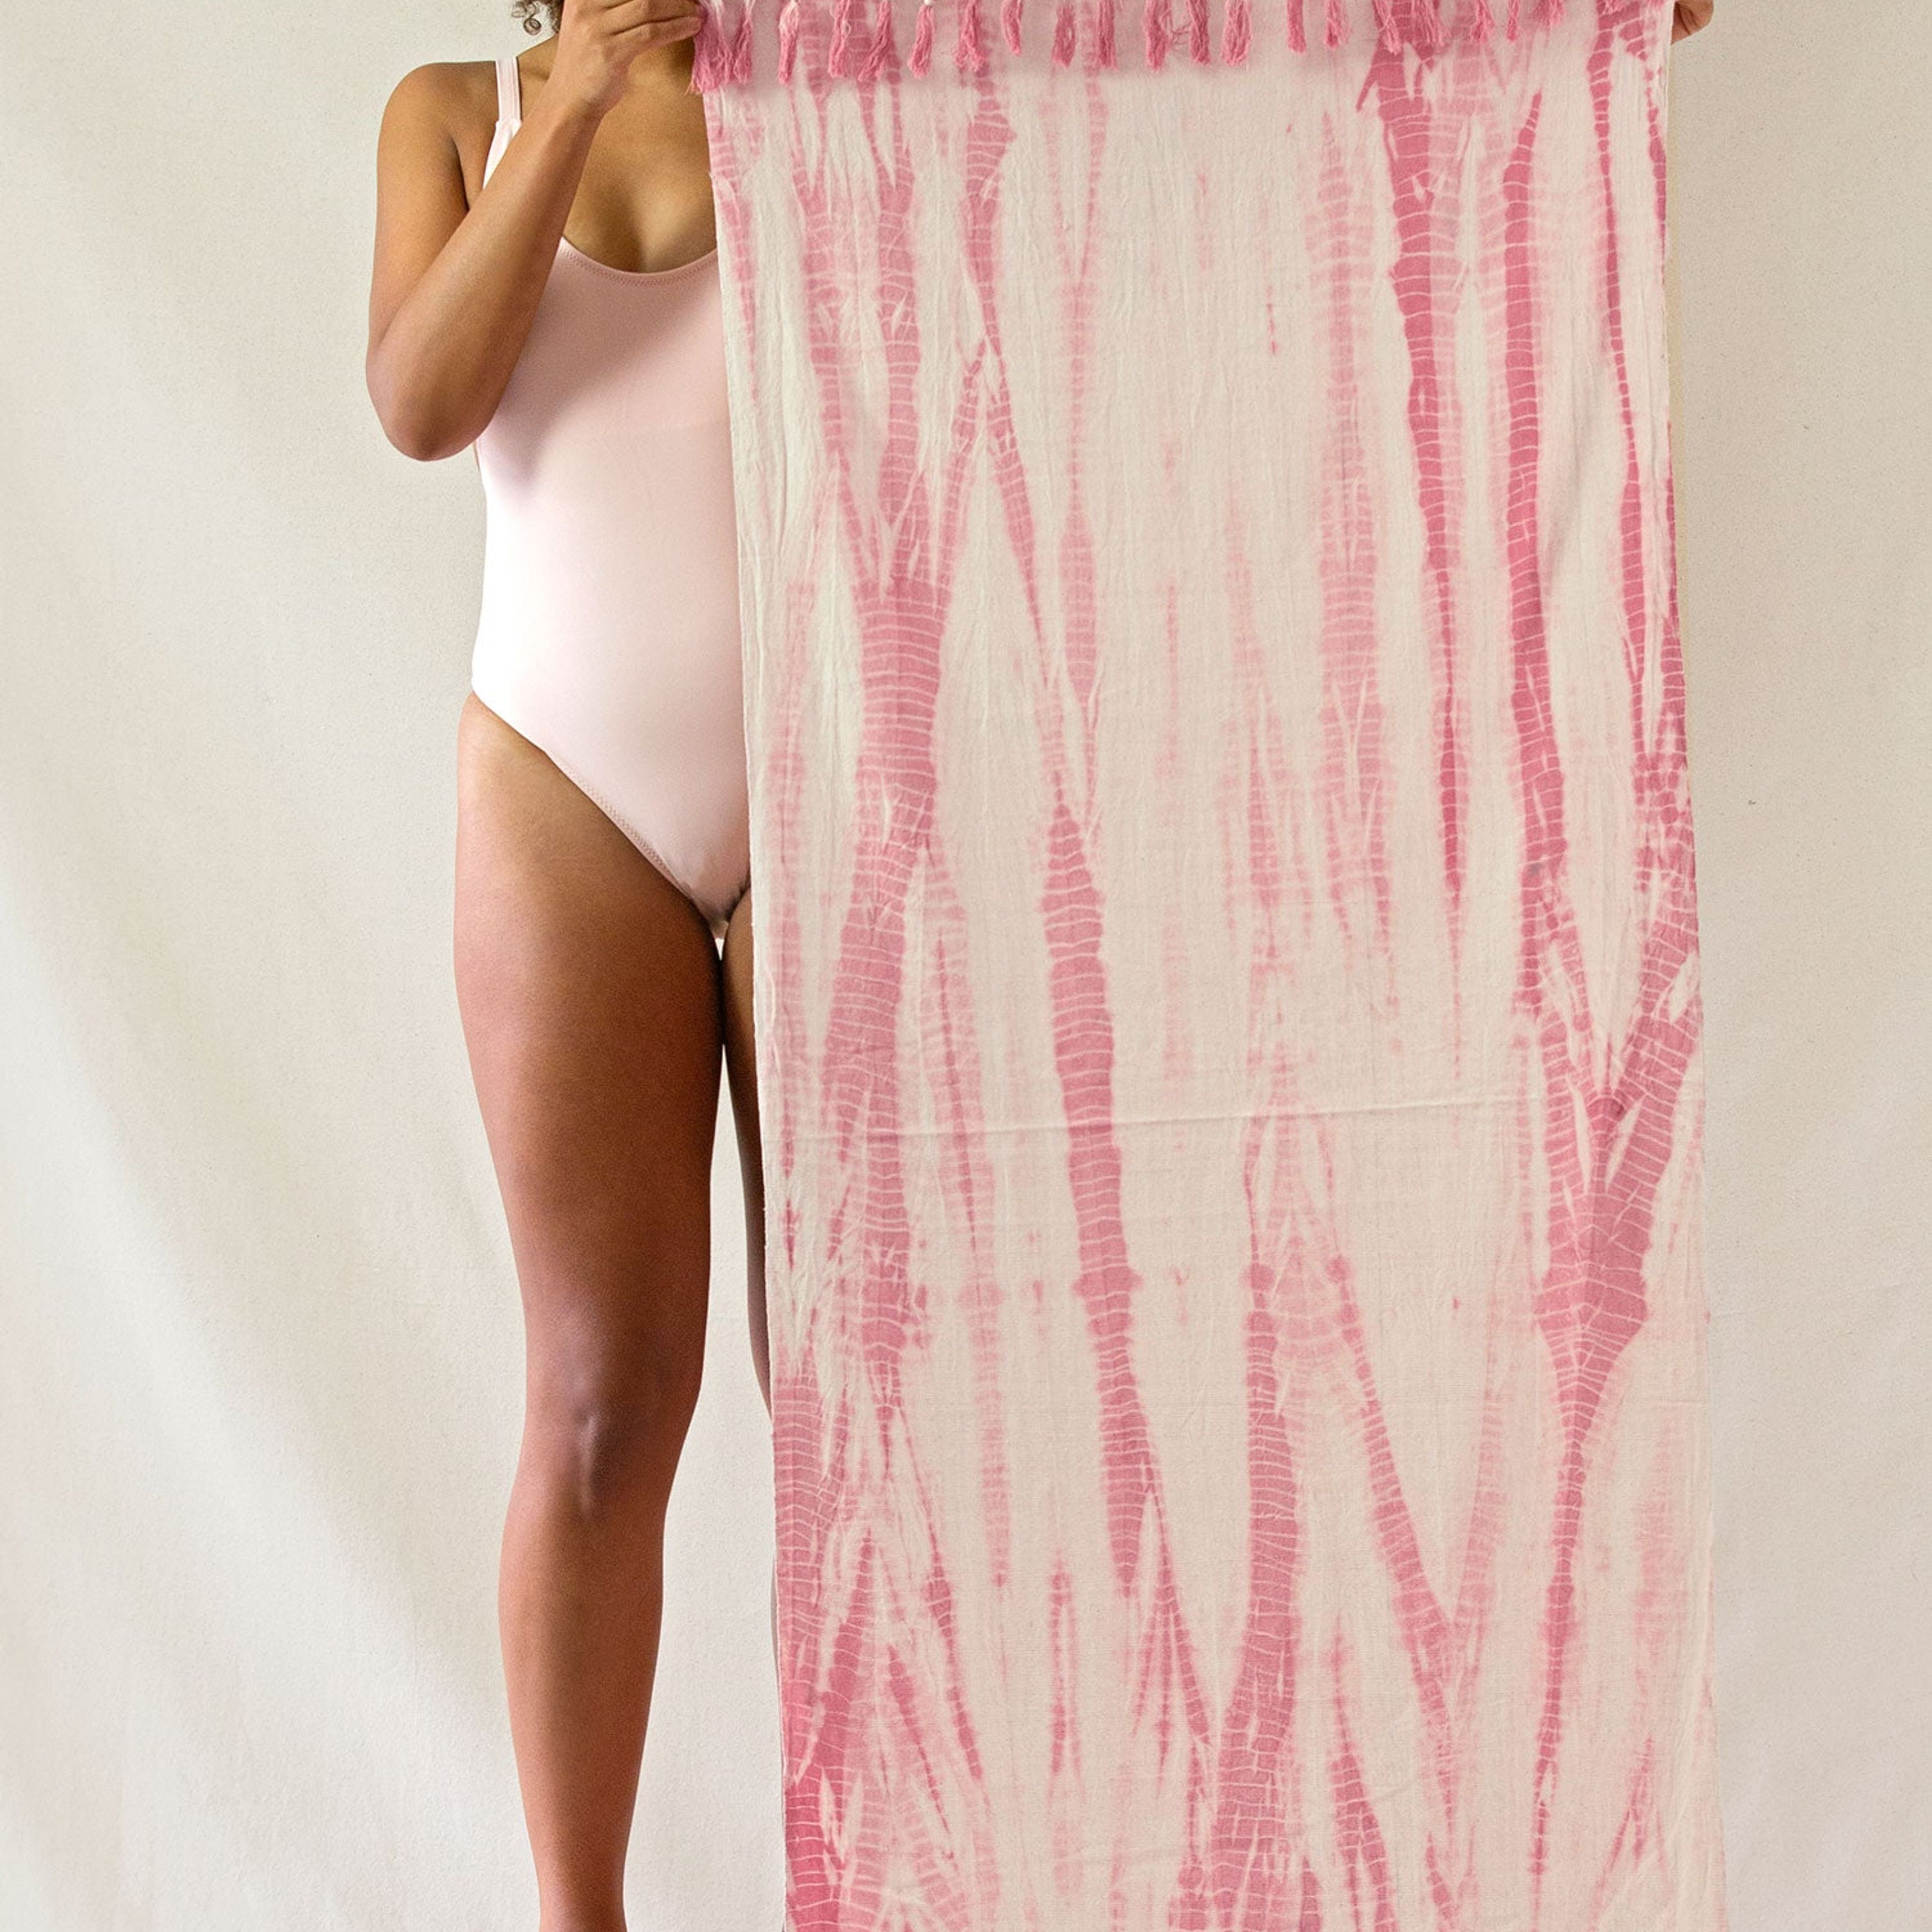 Naturally Dyed Herbal Yoga Towels